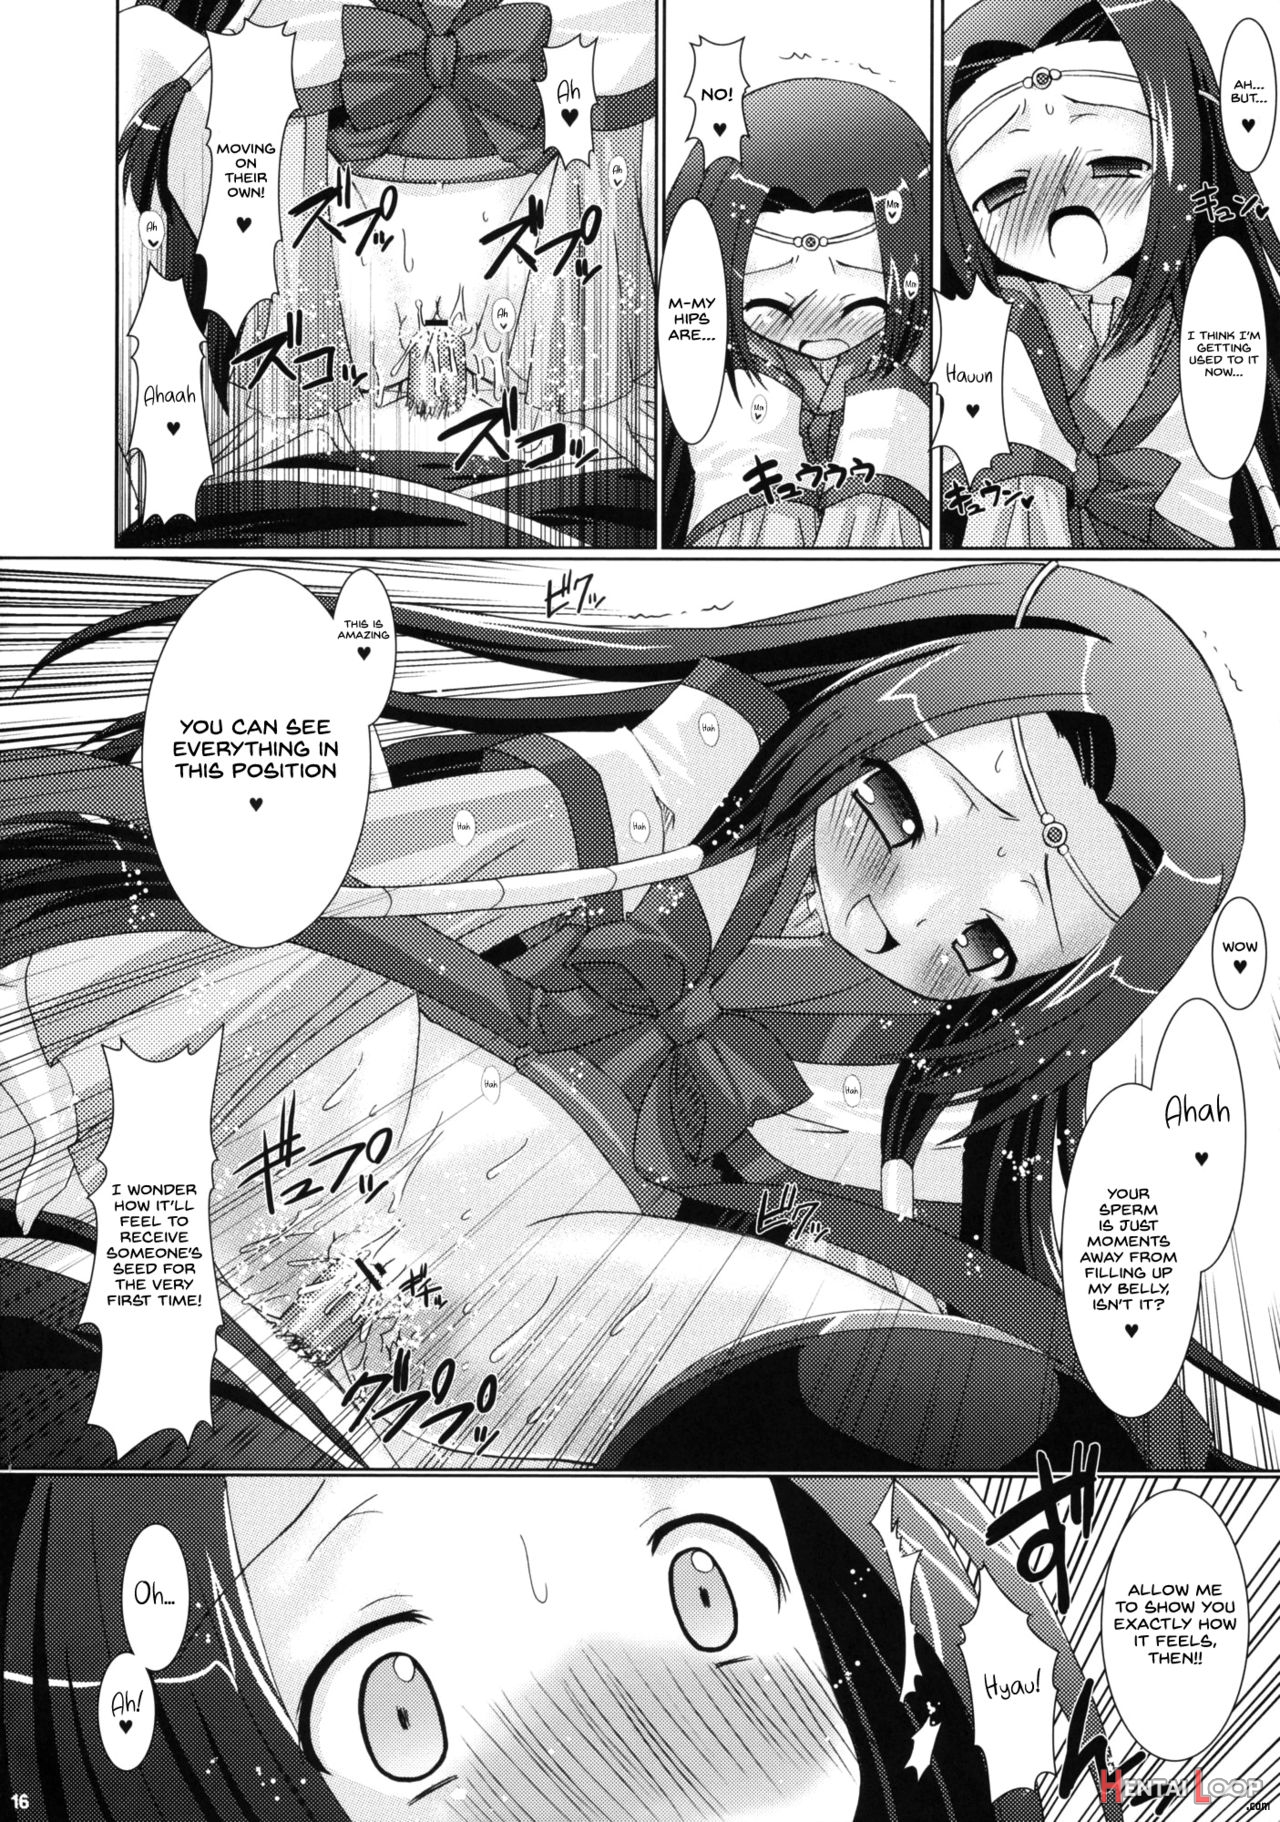 Kouhime Kyouhime page 16